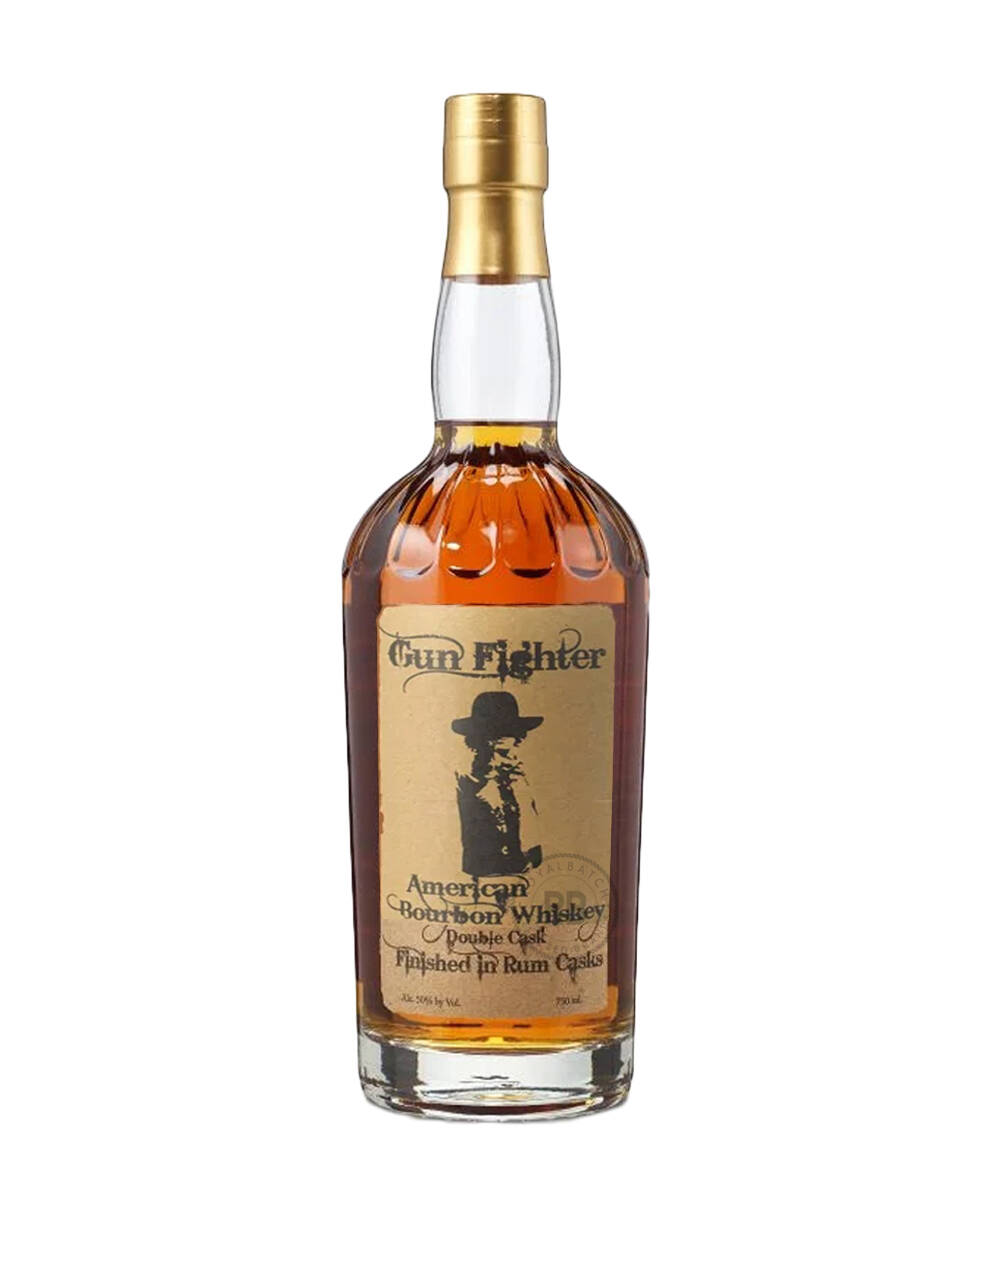 Gun Fighter American Bourbon Whiskey Double Cask Finished in Rum Casks